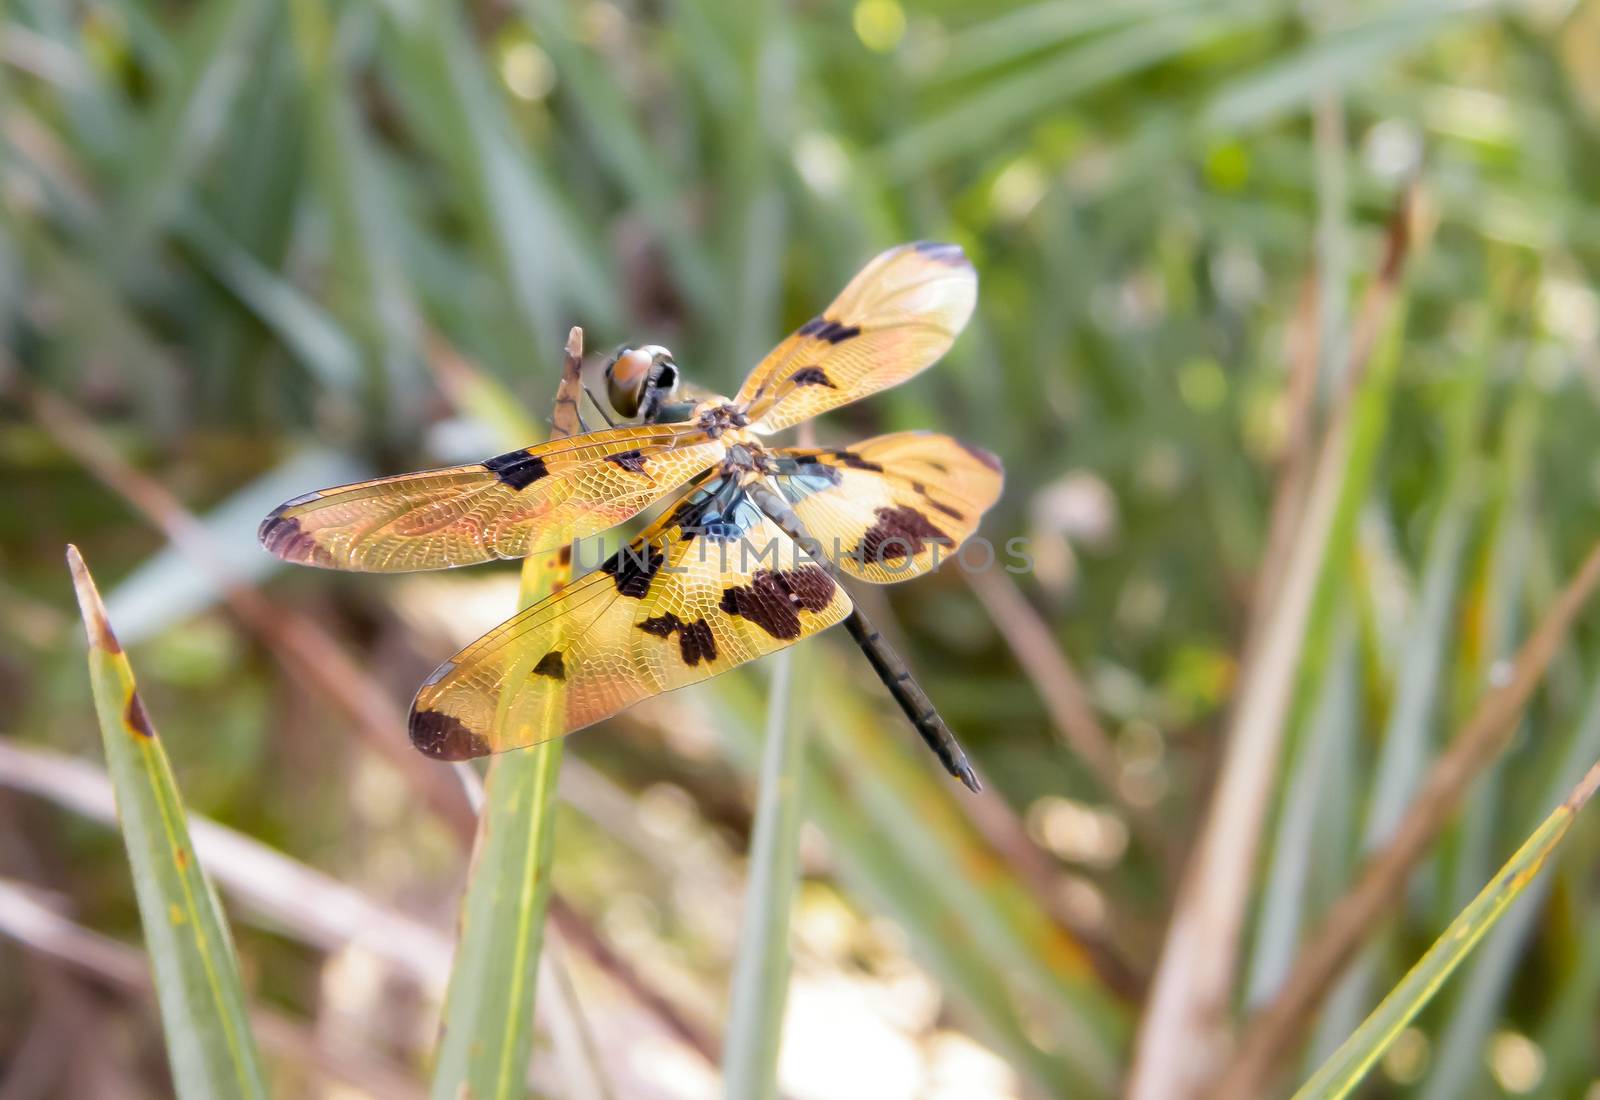 A dragonfly insect (Odonata infraorder Anisoptera), wild animal on Green Plant Leaves grass area. Animal themes and behavior. Nature Blooms background. Extreme close-up.